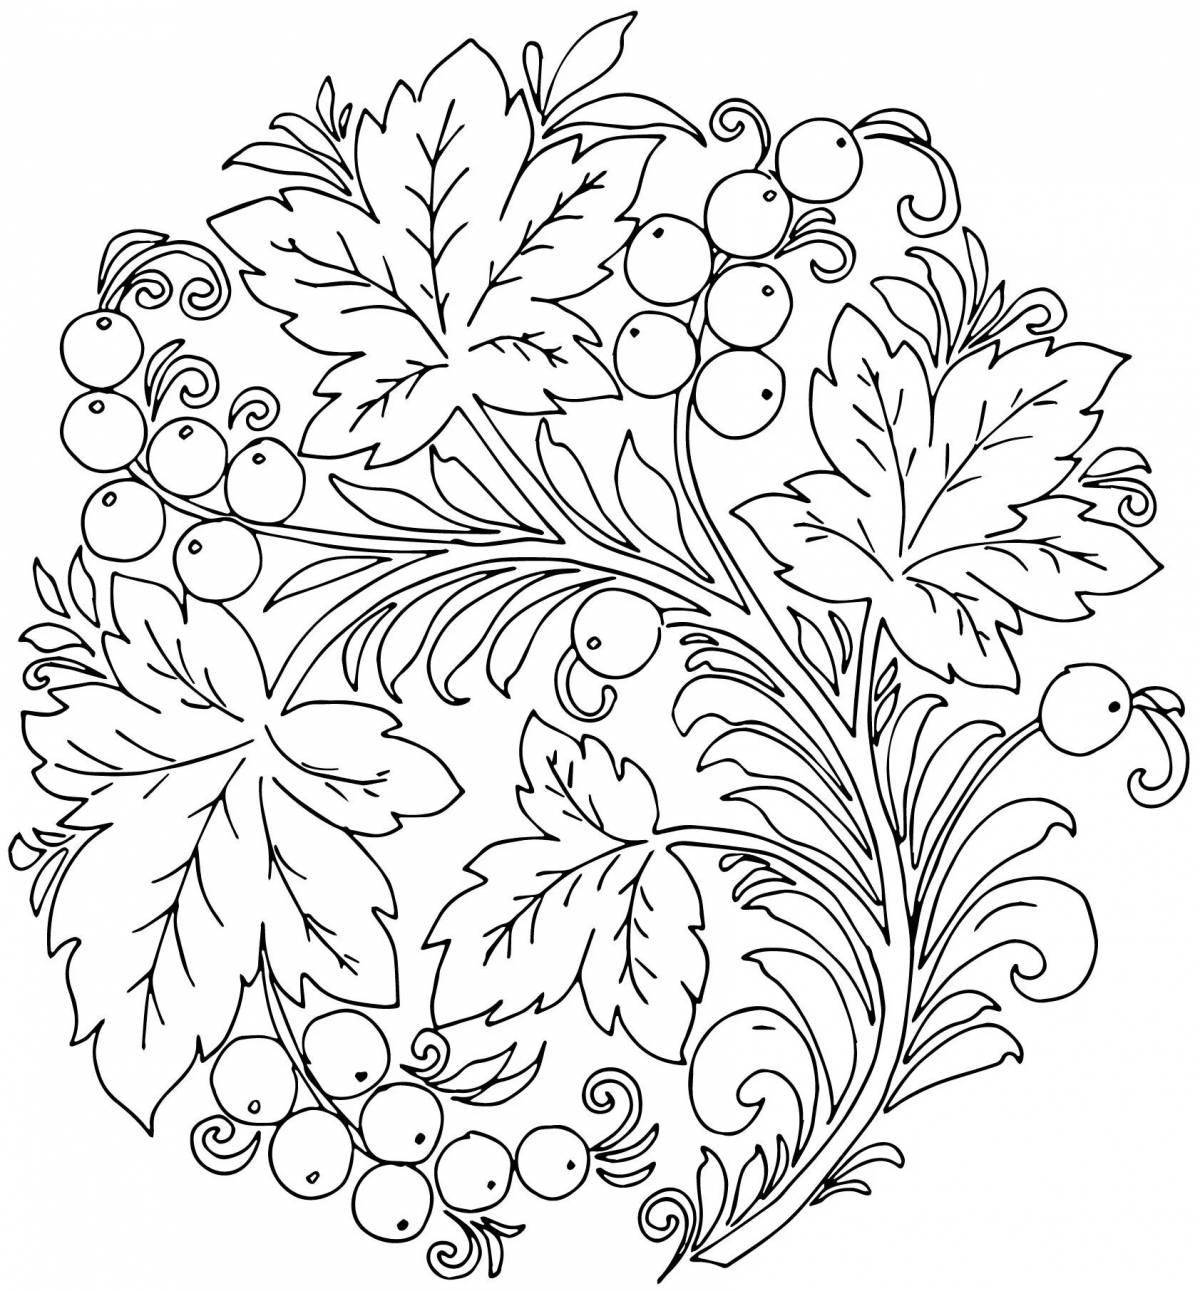 Coloring page charming russian ornament